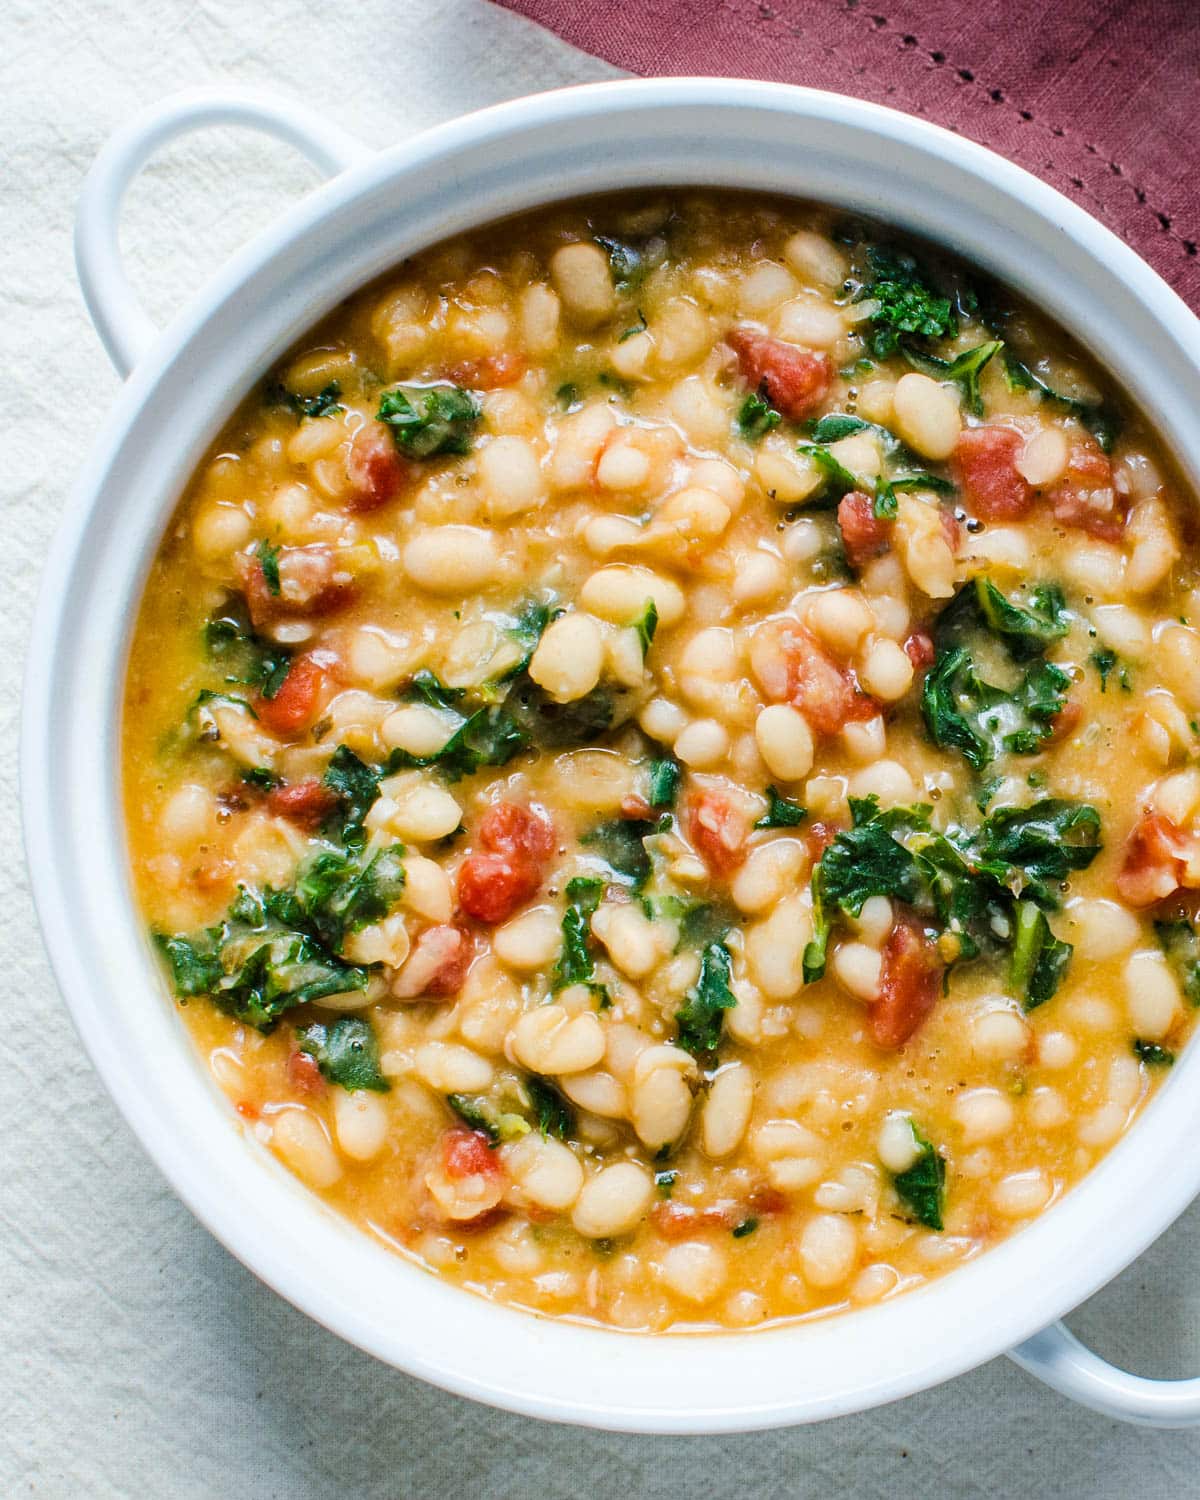 A dish filled with the stewed white beans, kale and tomatoes. 